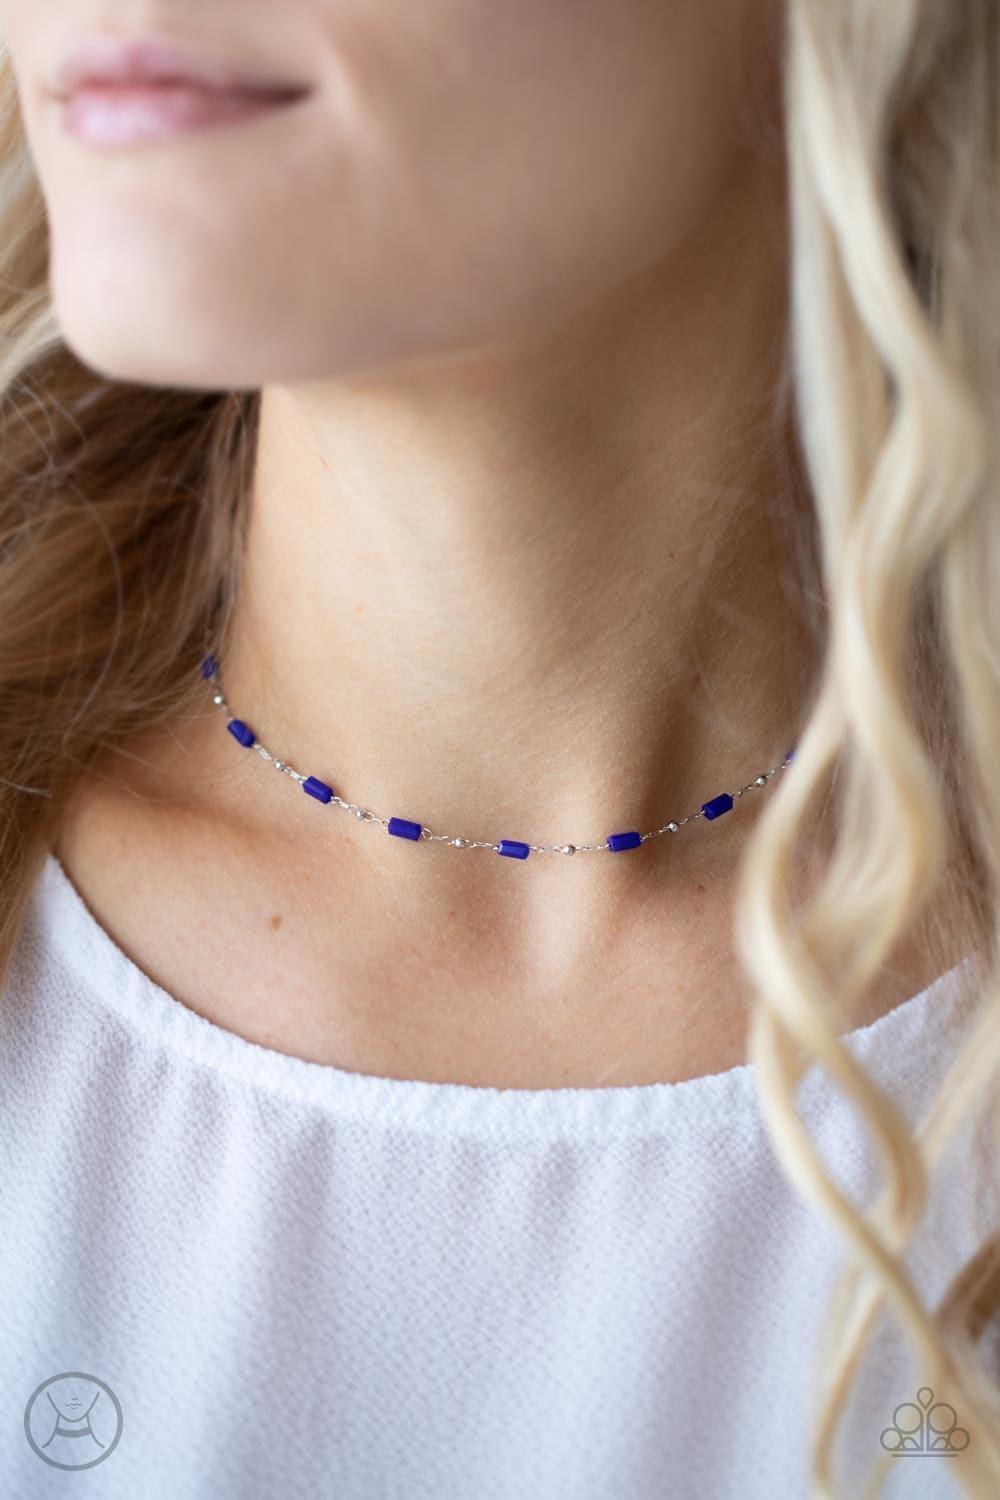 Paparazzi Accessories - Urban Expo - Blue Choker Necklace - Bling by JessieK